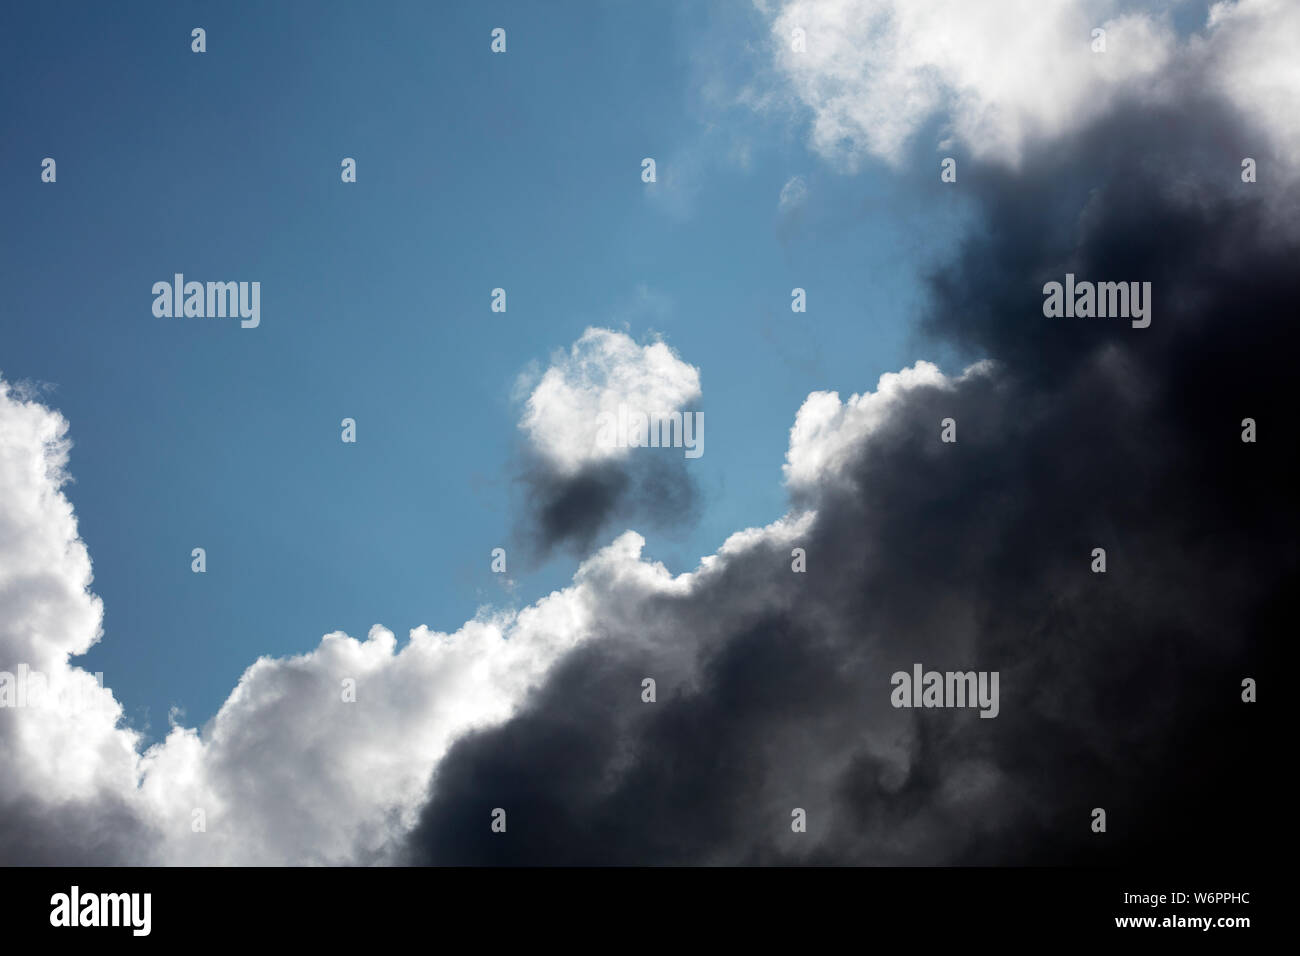 Dramatic sky with clouds background fine art in high quality prints products Stock Photo